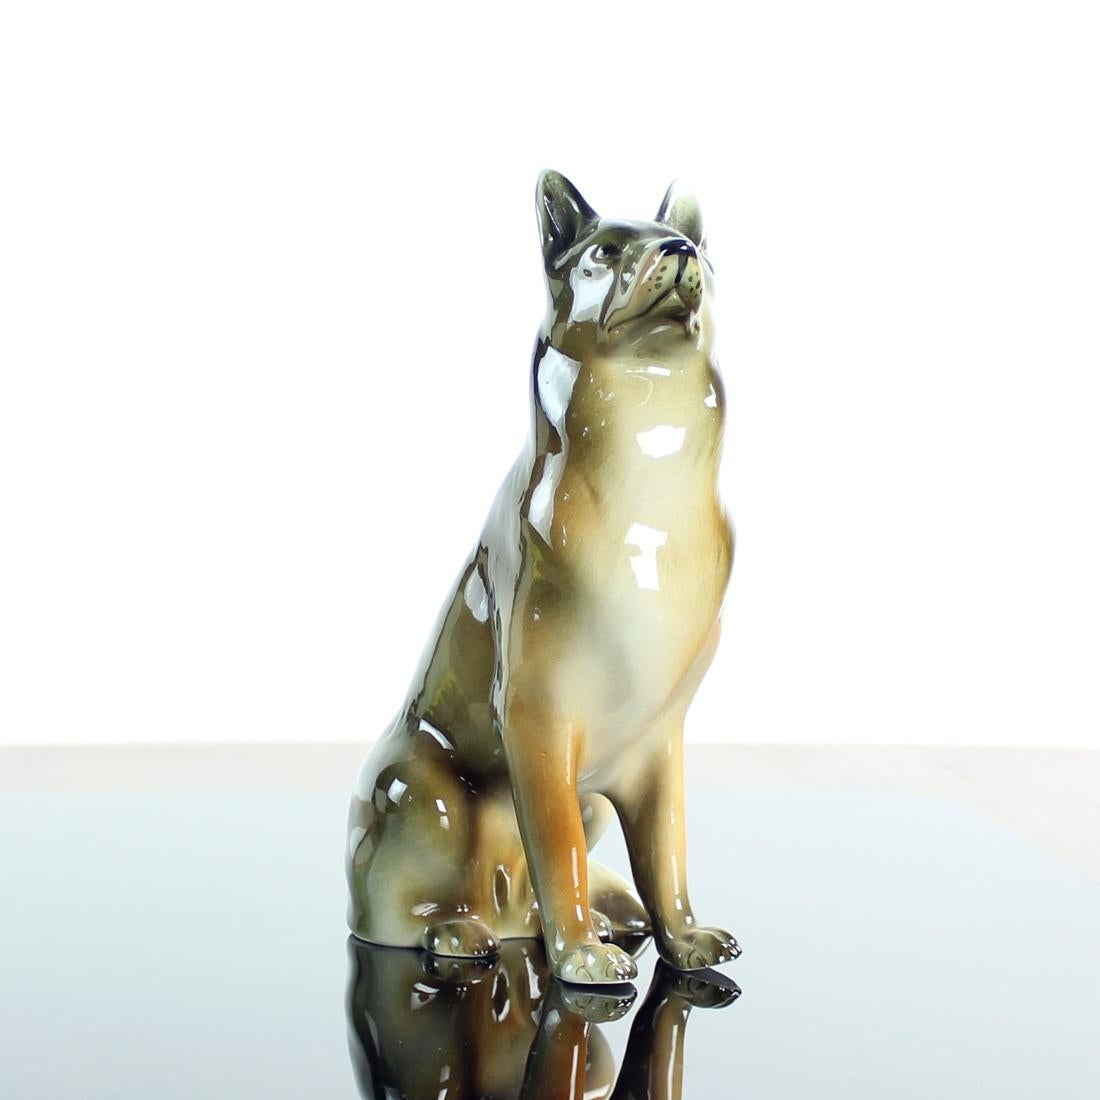 Beautiful piece of a canine statue portraying German Shepard. The statue was produced by Royal Dux company in 1960s in Czechoslovakia, one of the leading porcelain figurine makers of the era. The German shepard was an iconic breed in the Communist